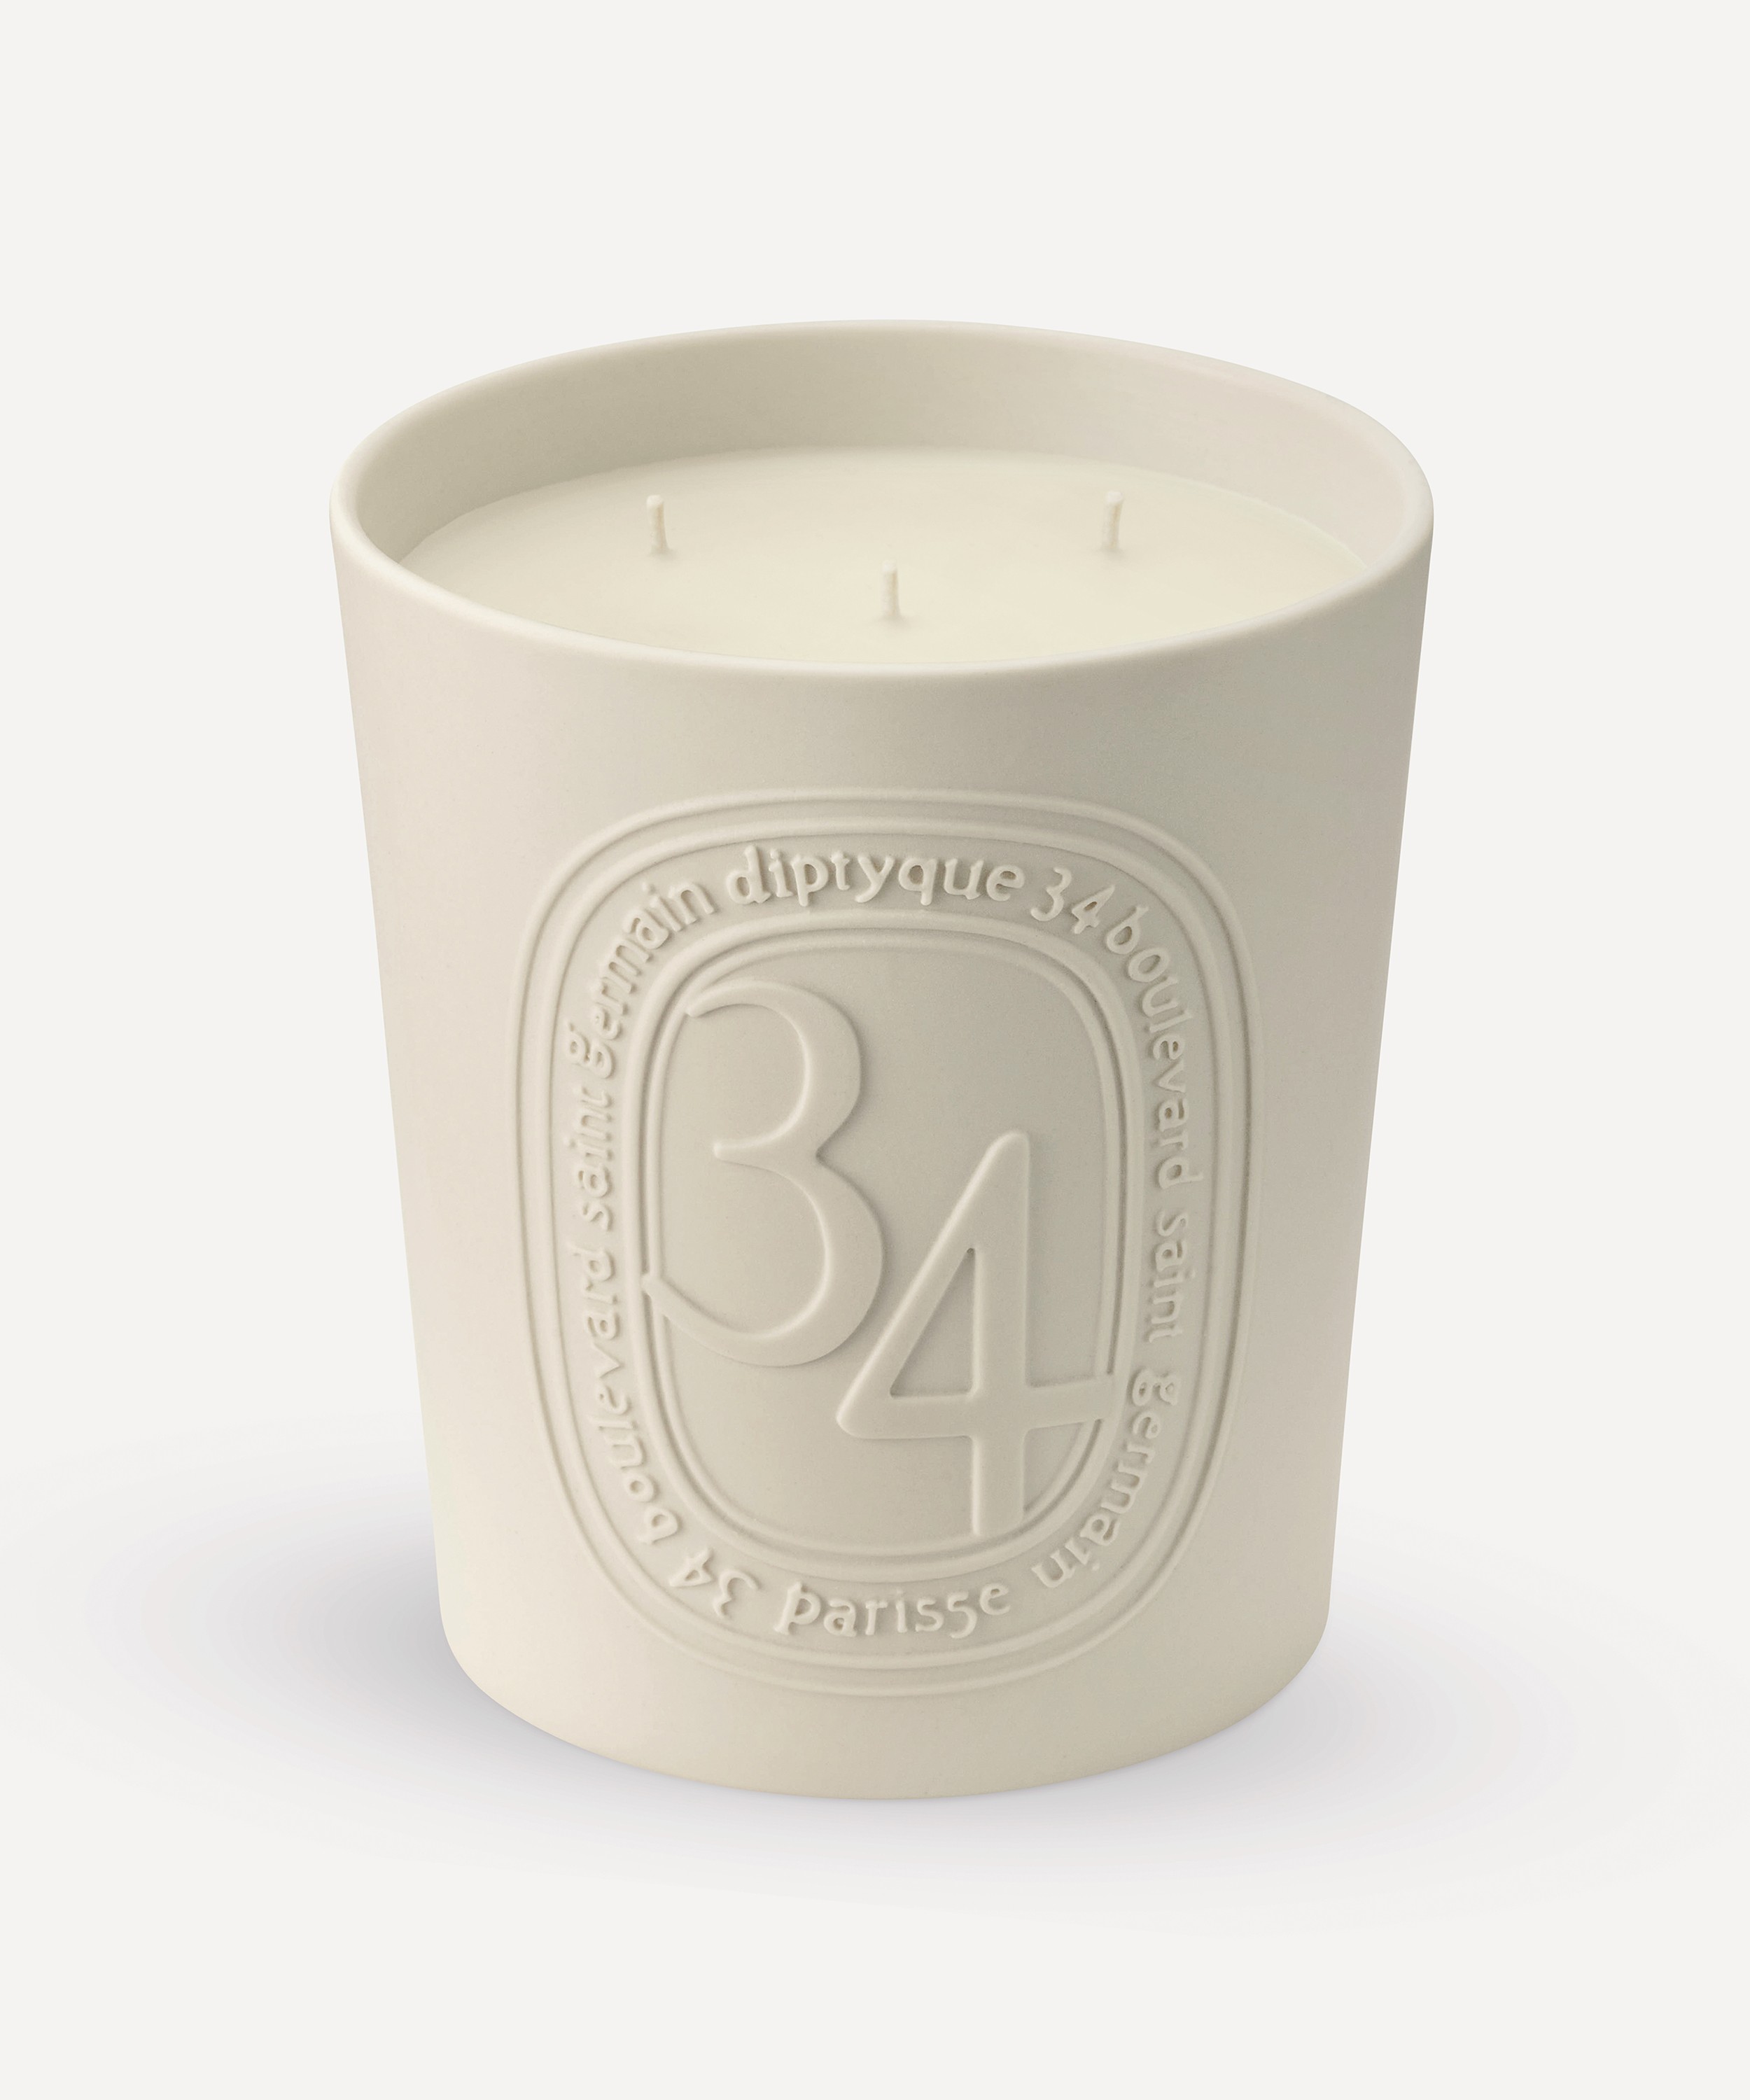 Diptyque - 34 Boulevard Saint Germain Scented Candle 600g image number 0